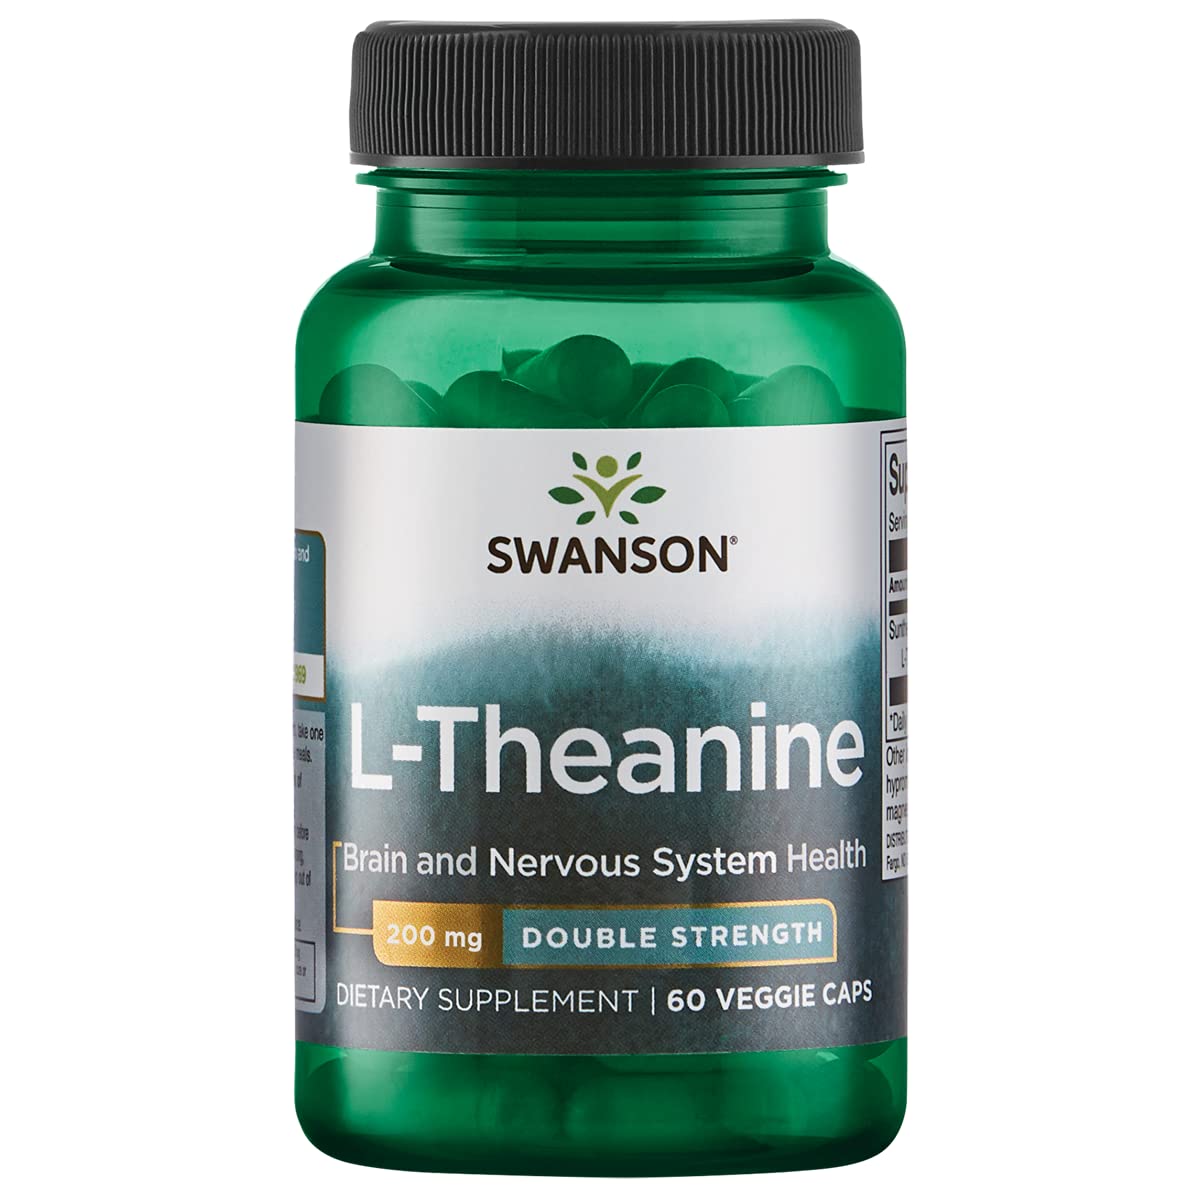 Swanson L Theanine Double Strength, 200 mg, 60 Veggie Capsules